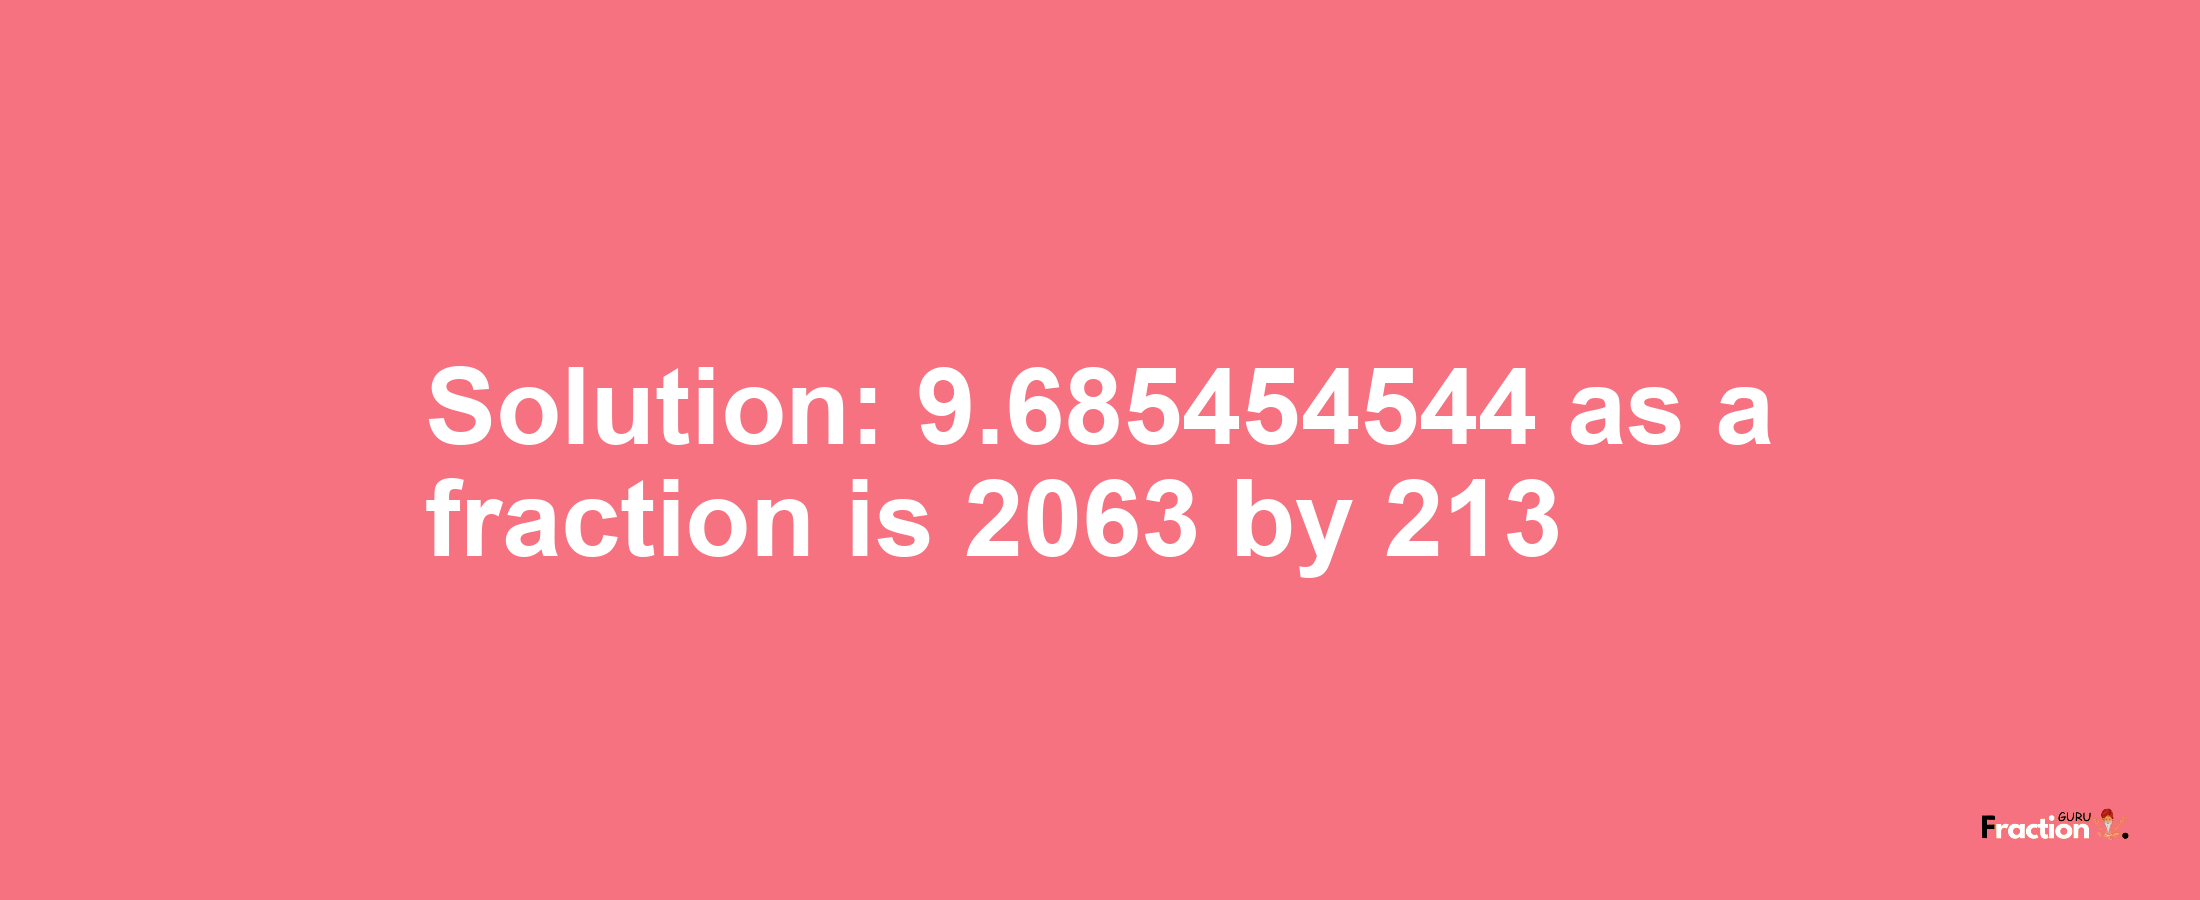 Solution:9.685454544 as a fraction is 2063/213